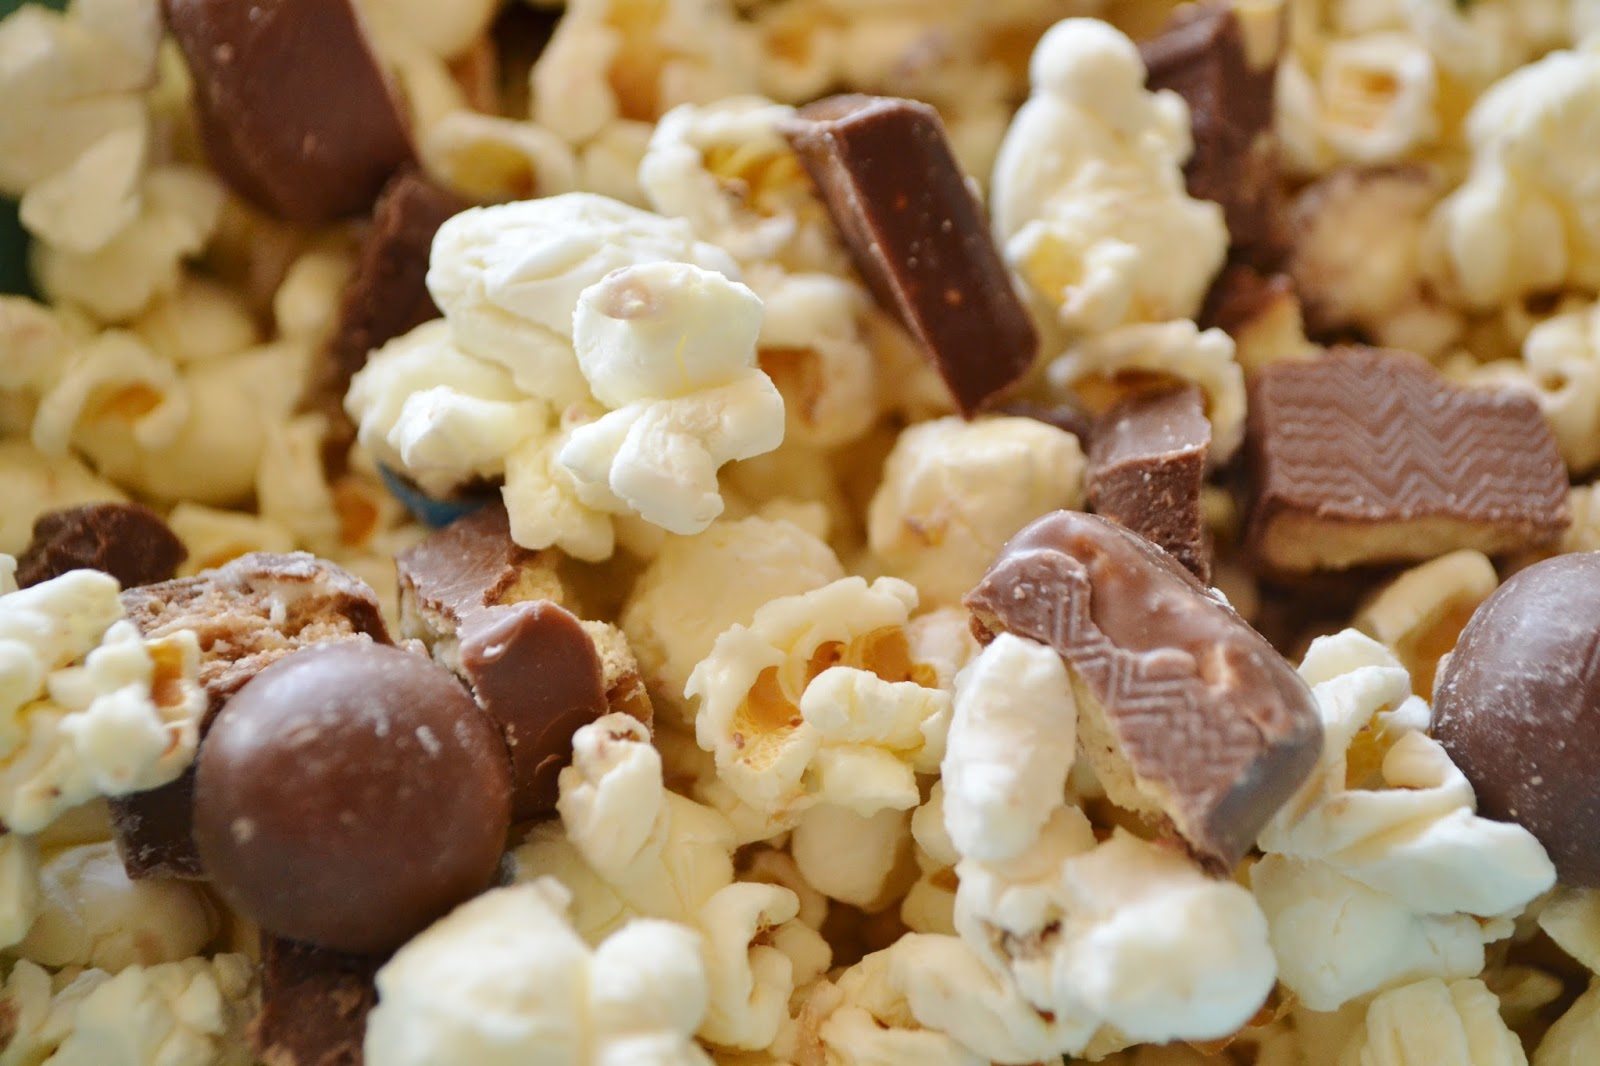 White chocolate popcorn with candy bars